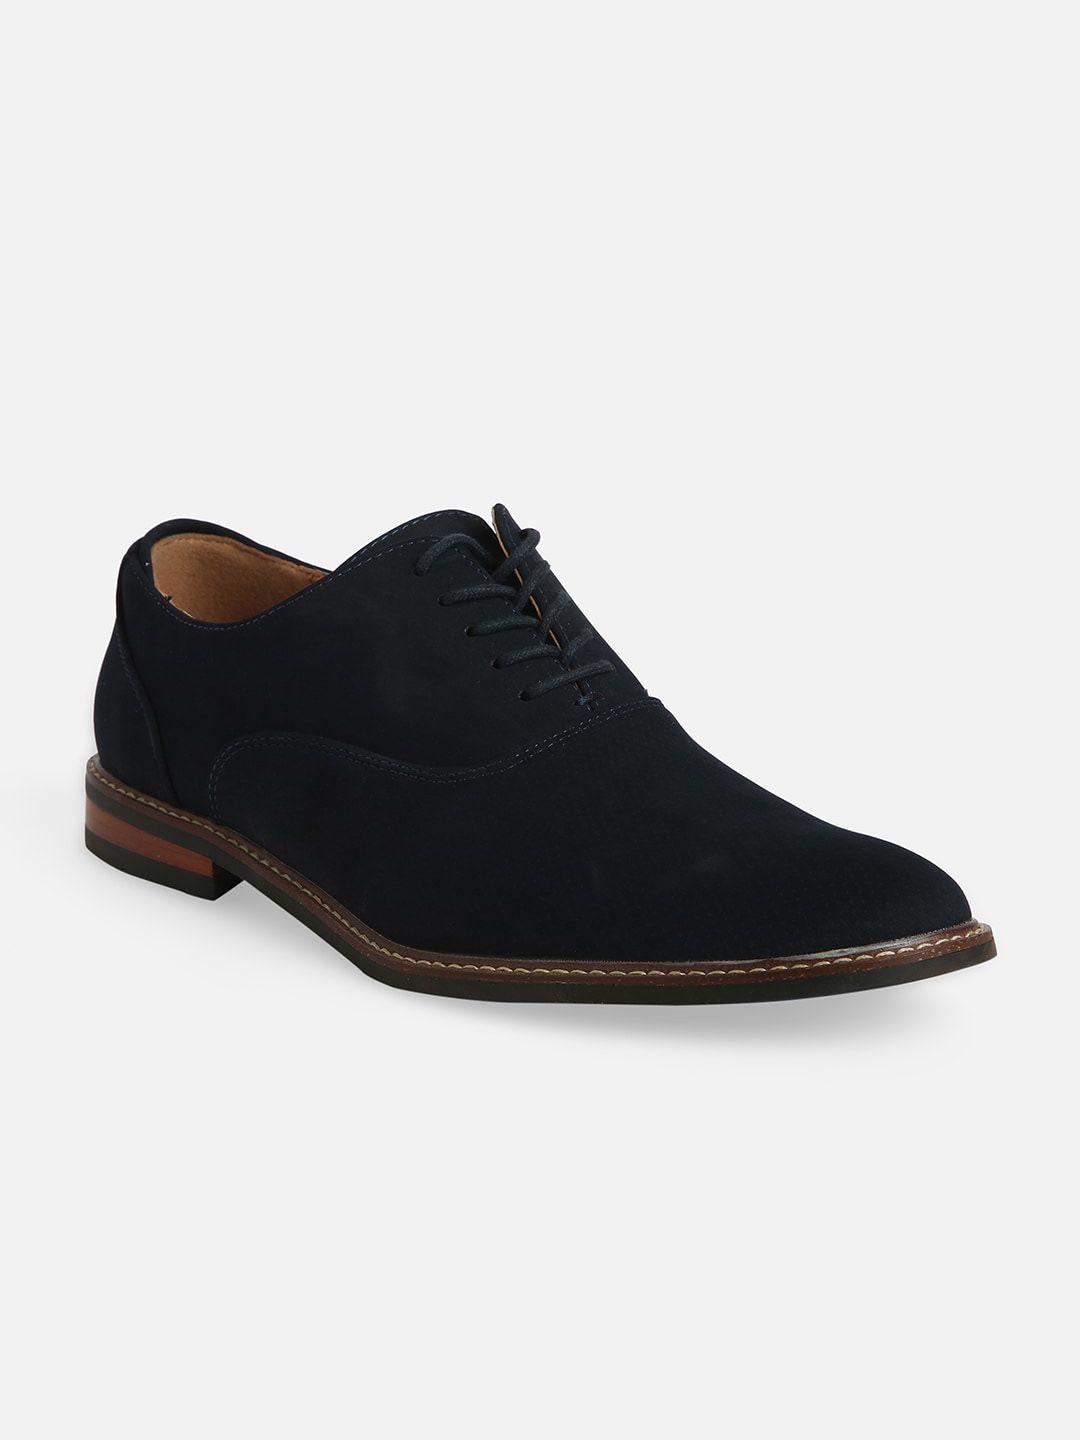 Call It Spring Men Round Toe Formal Oxfords